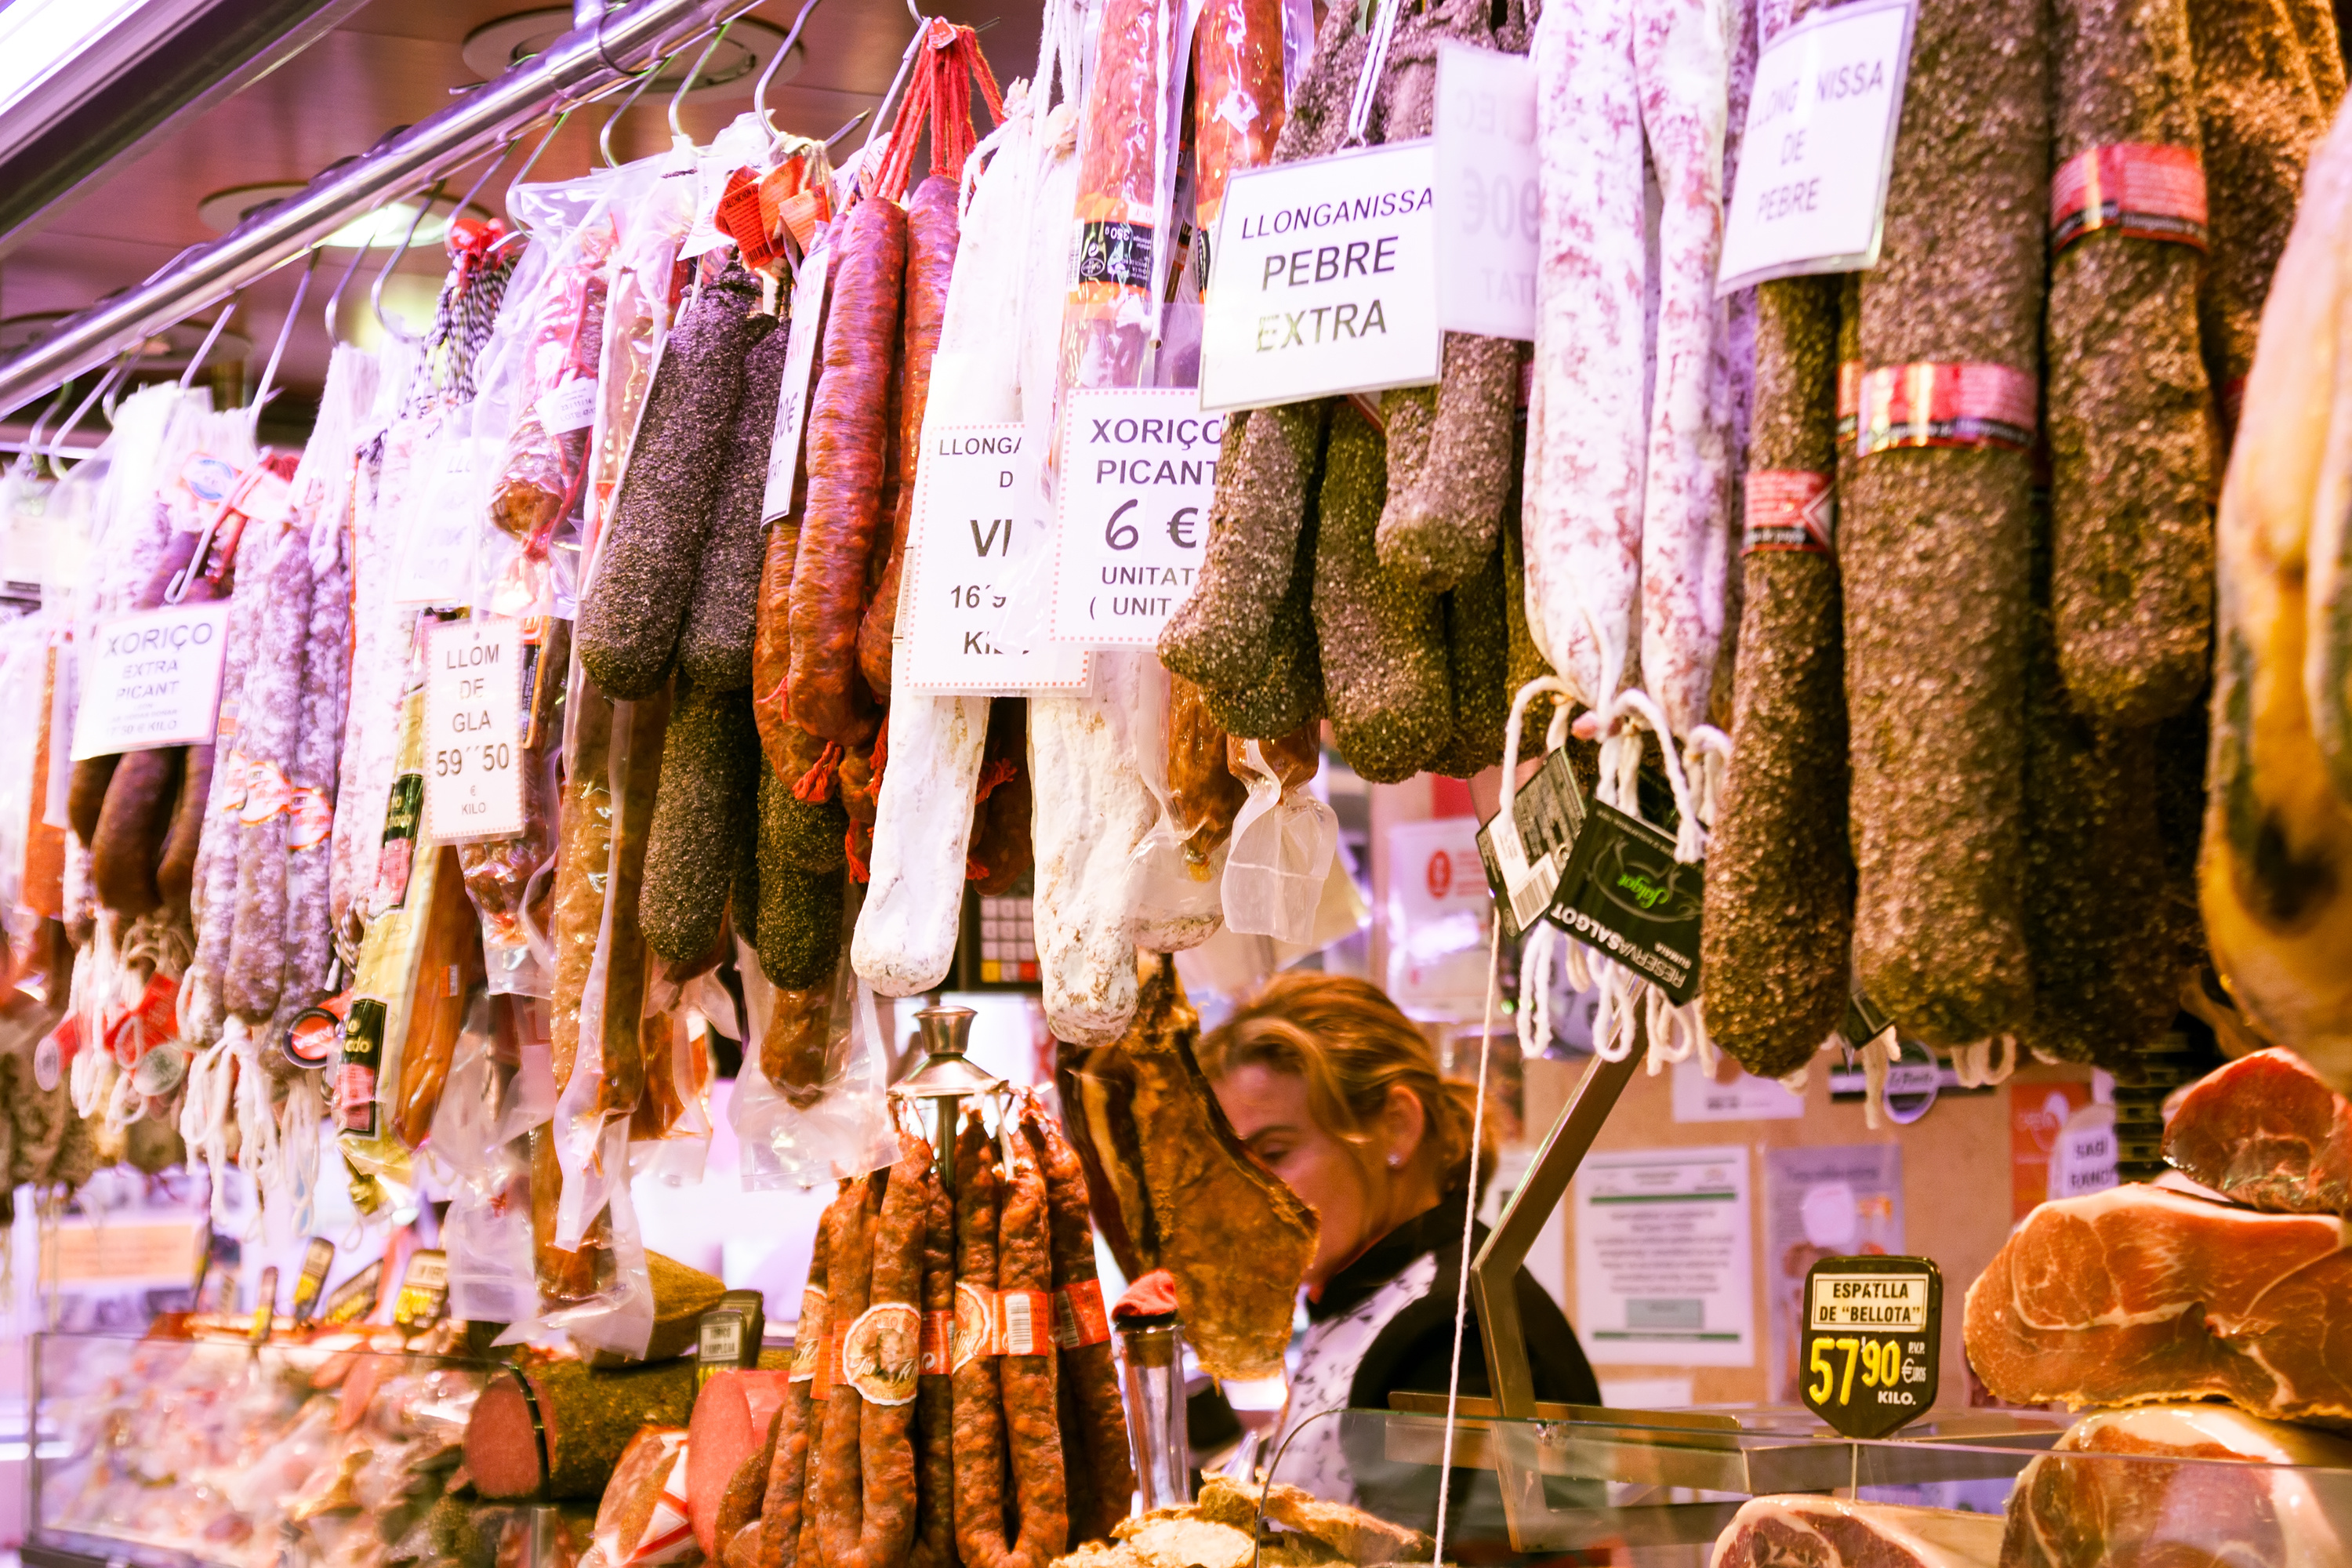 Outdoor market stall with cured meat